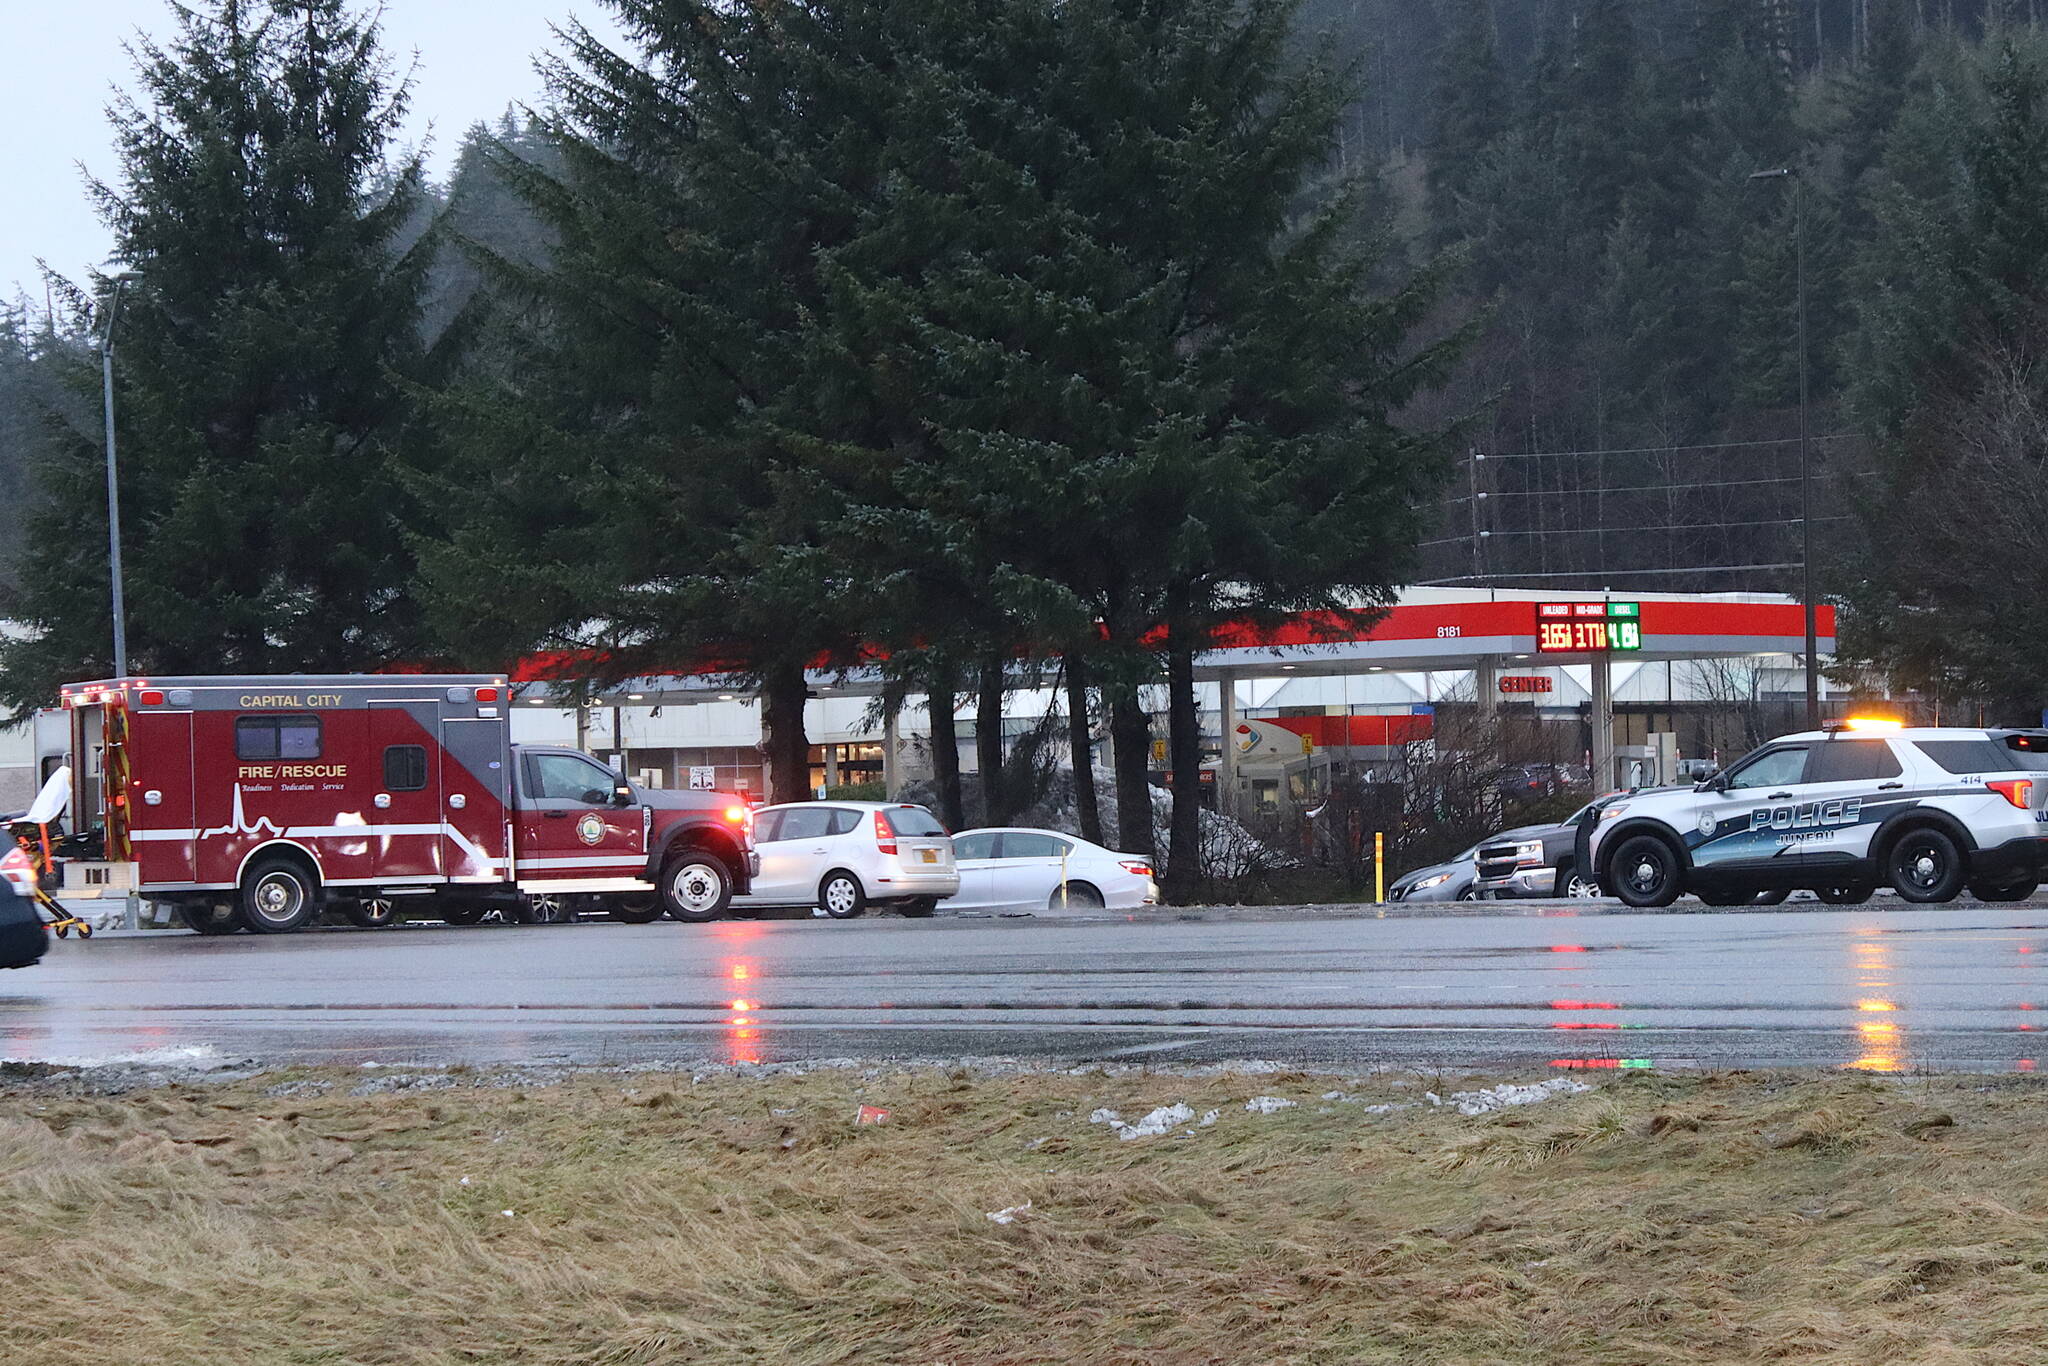 Police and fire officials respond to an injury accident at the Fred Meyer intersection on Saturday, Dec. 23. Limited safety improvements at the intersection scheduled for completion by Oct. 31 have not been finished due to supply chain and other issues, according to a state transportation department spokesperson. (Mark Sabbatini / Juneau Empire)